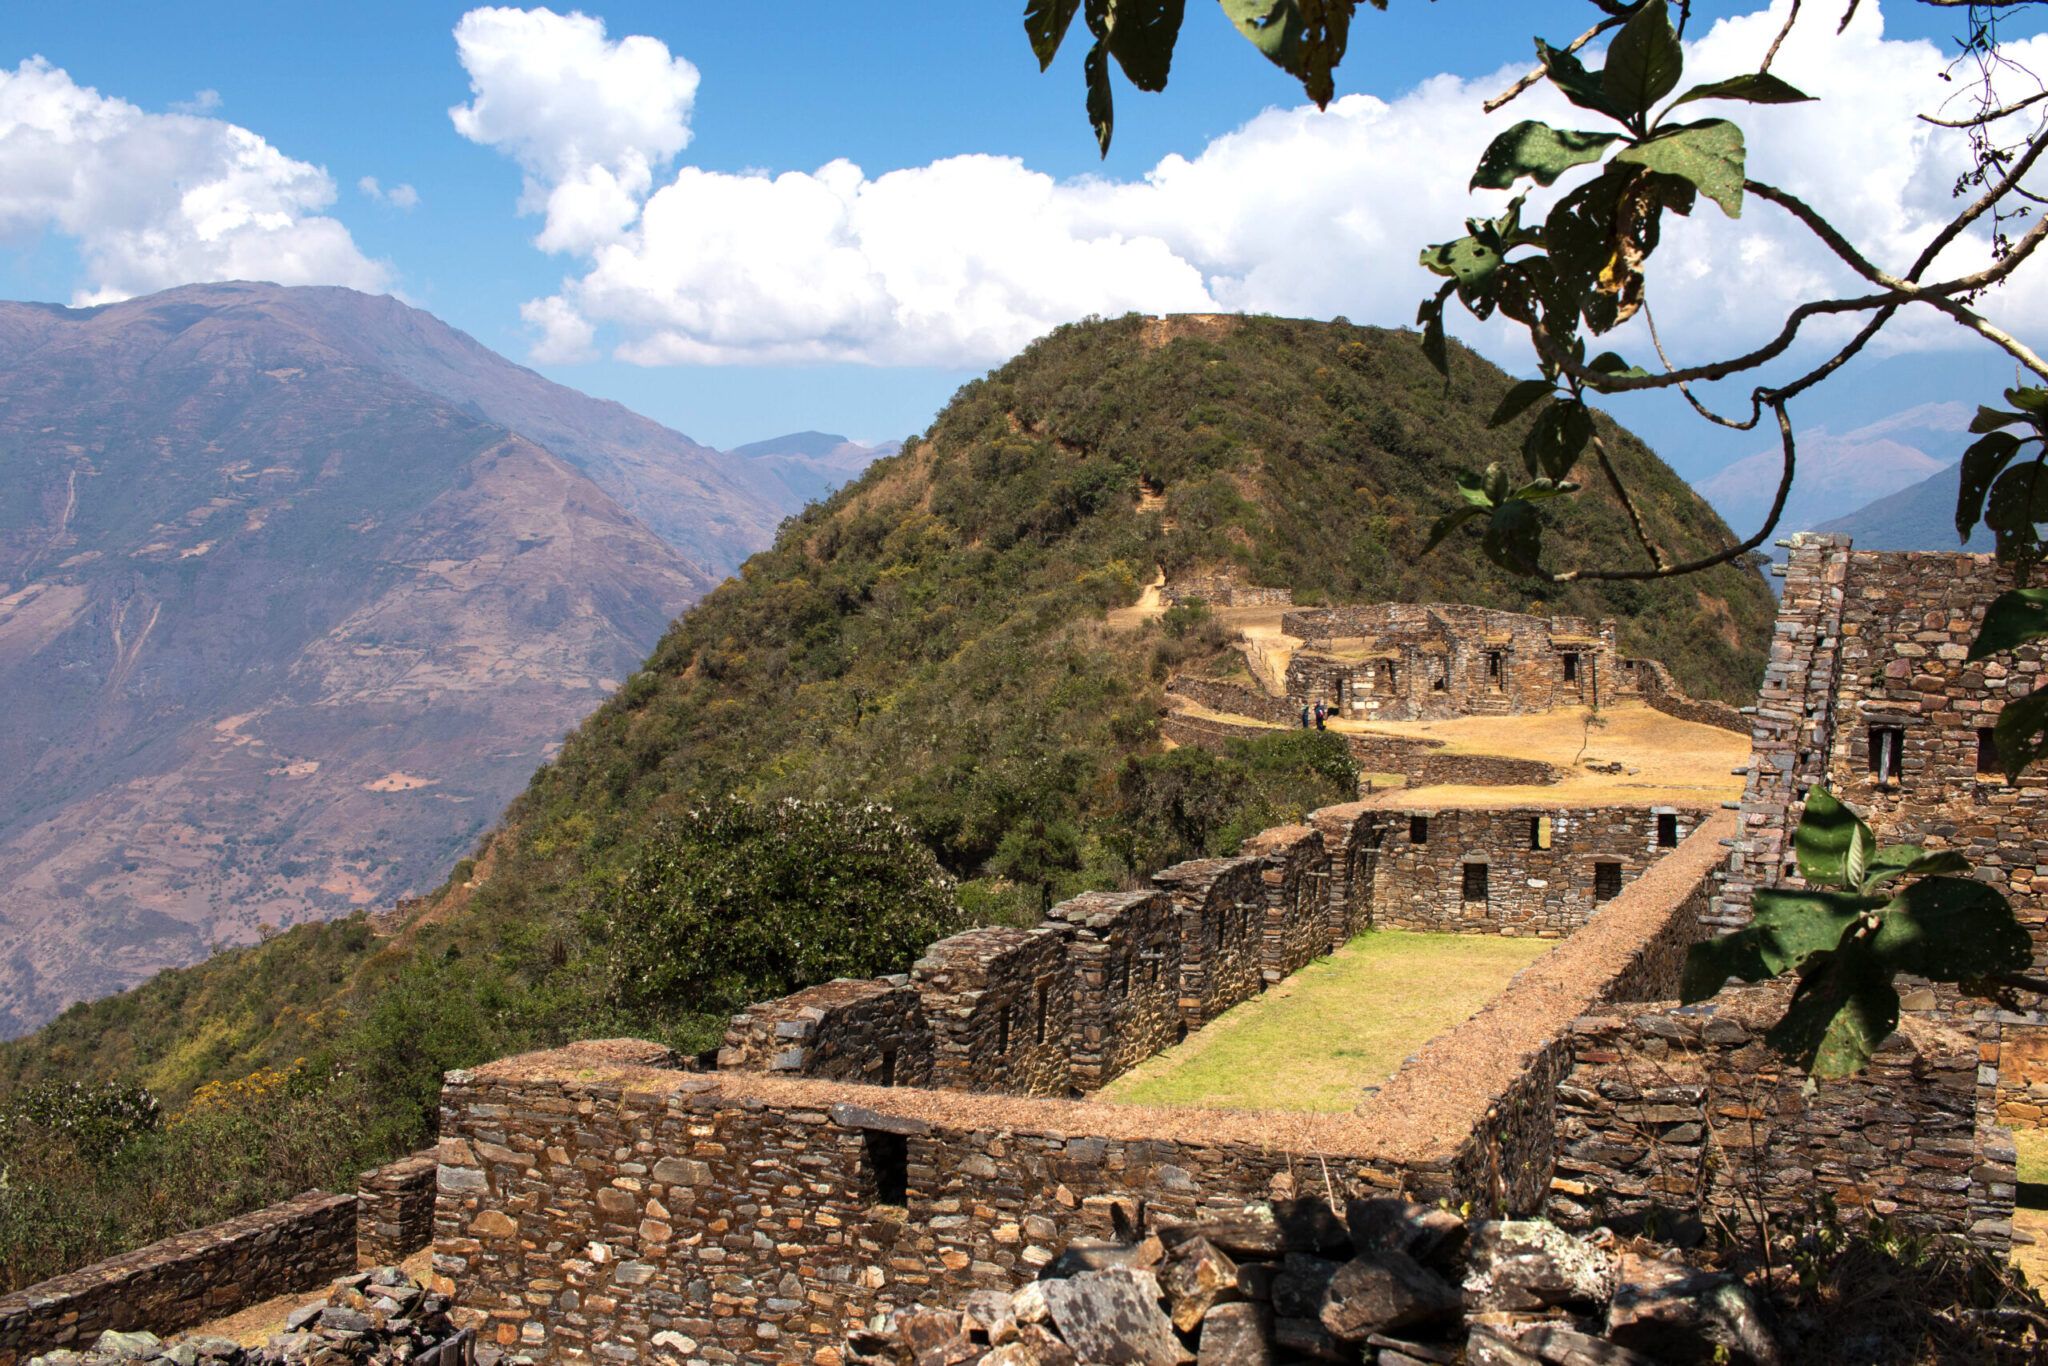 Places for Trekking in Peru